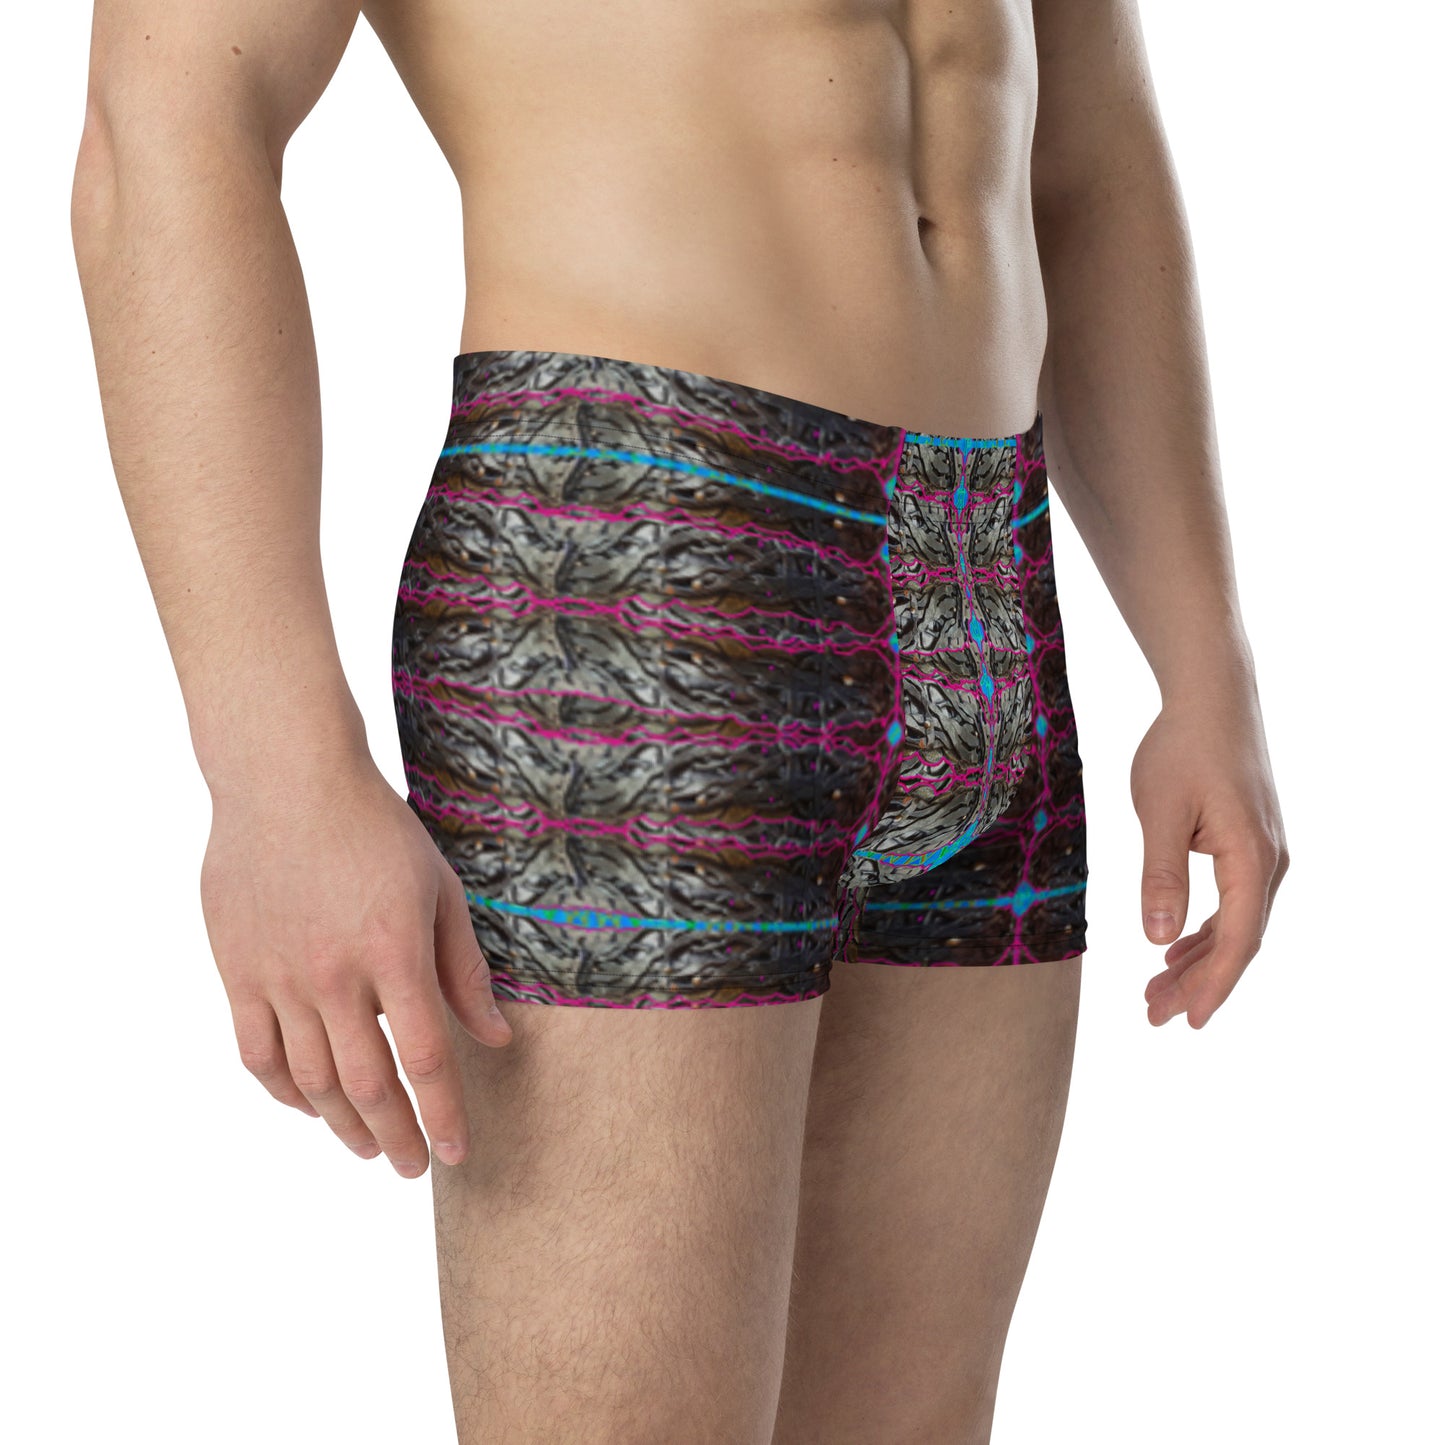 Boxer Briefs (His/They)(Rind#11 Tree Link) RJSTH@Fabric#11 RJSTHW2021 RJS